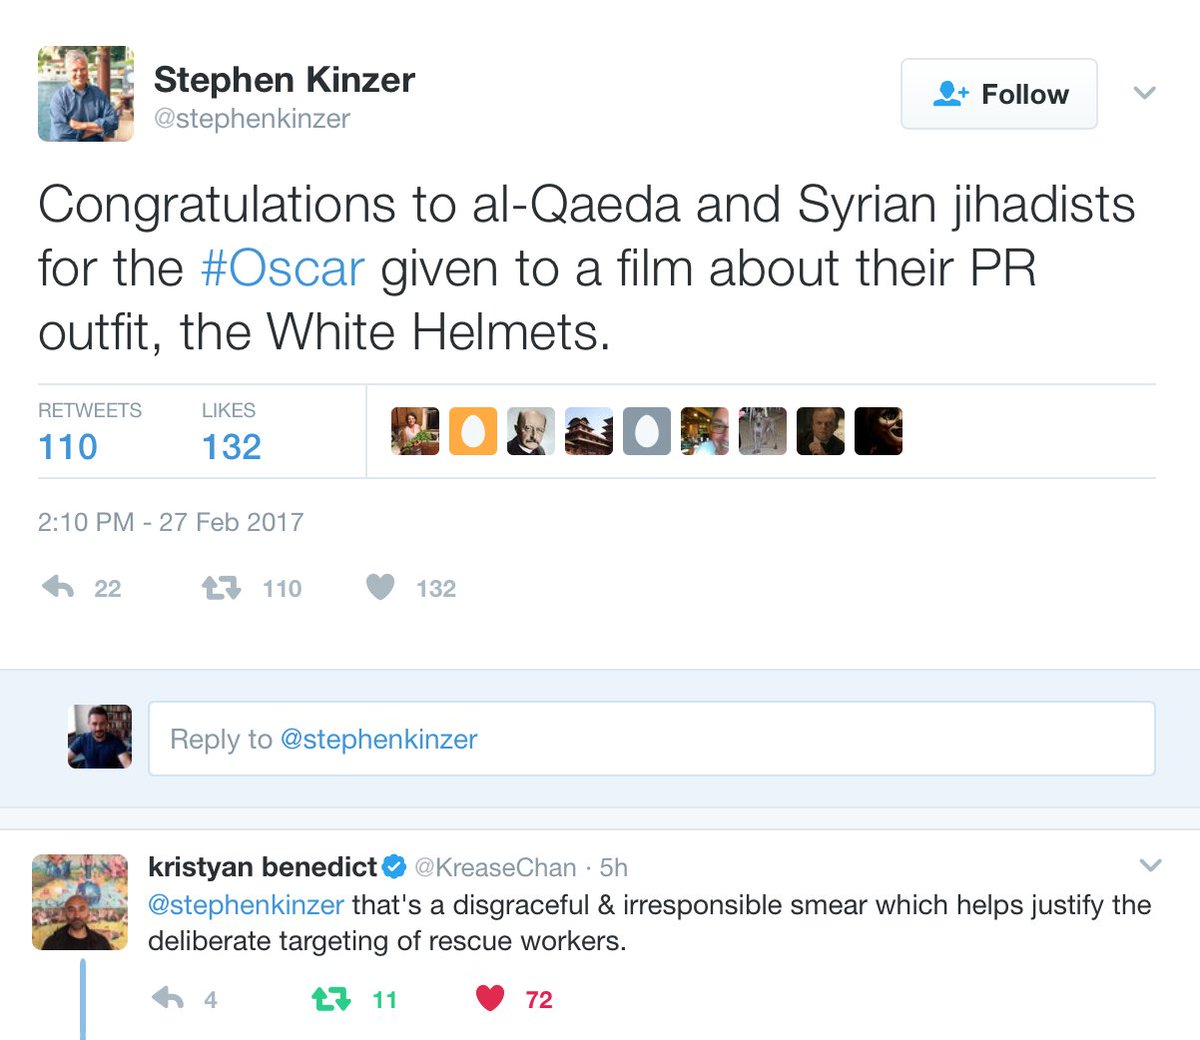 For those unfamiliar with Ruffalo's source, here he is responding to a documentary about the White Helmets winning an Oscar. And this racist dictator-worshipper is still employed  @WatsonInstitute,  @BrownUniversity and still published by  @BostonGlobe  @GlobeOpinion